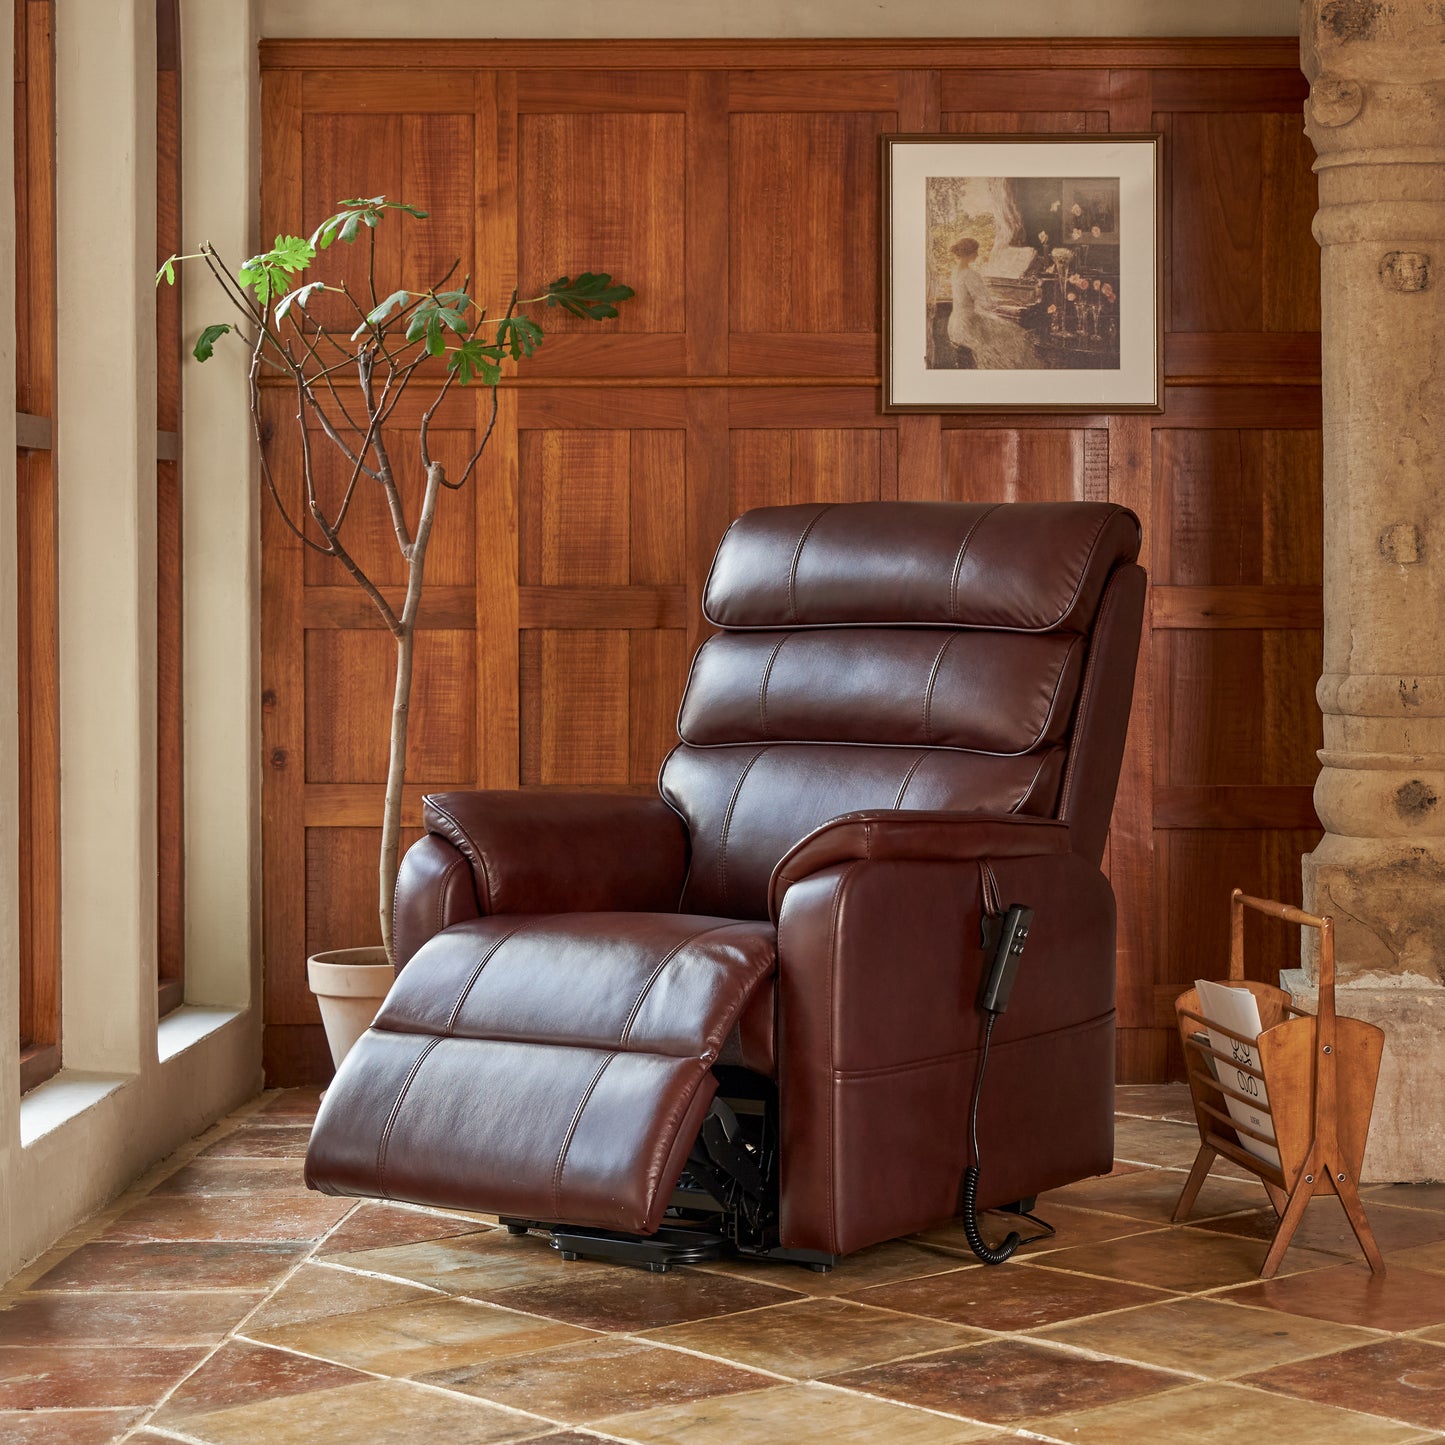 9188 Lay Flat Recliner Lift Chair With Heat And Massage(Medium, Real Leather Red Brown)